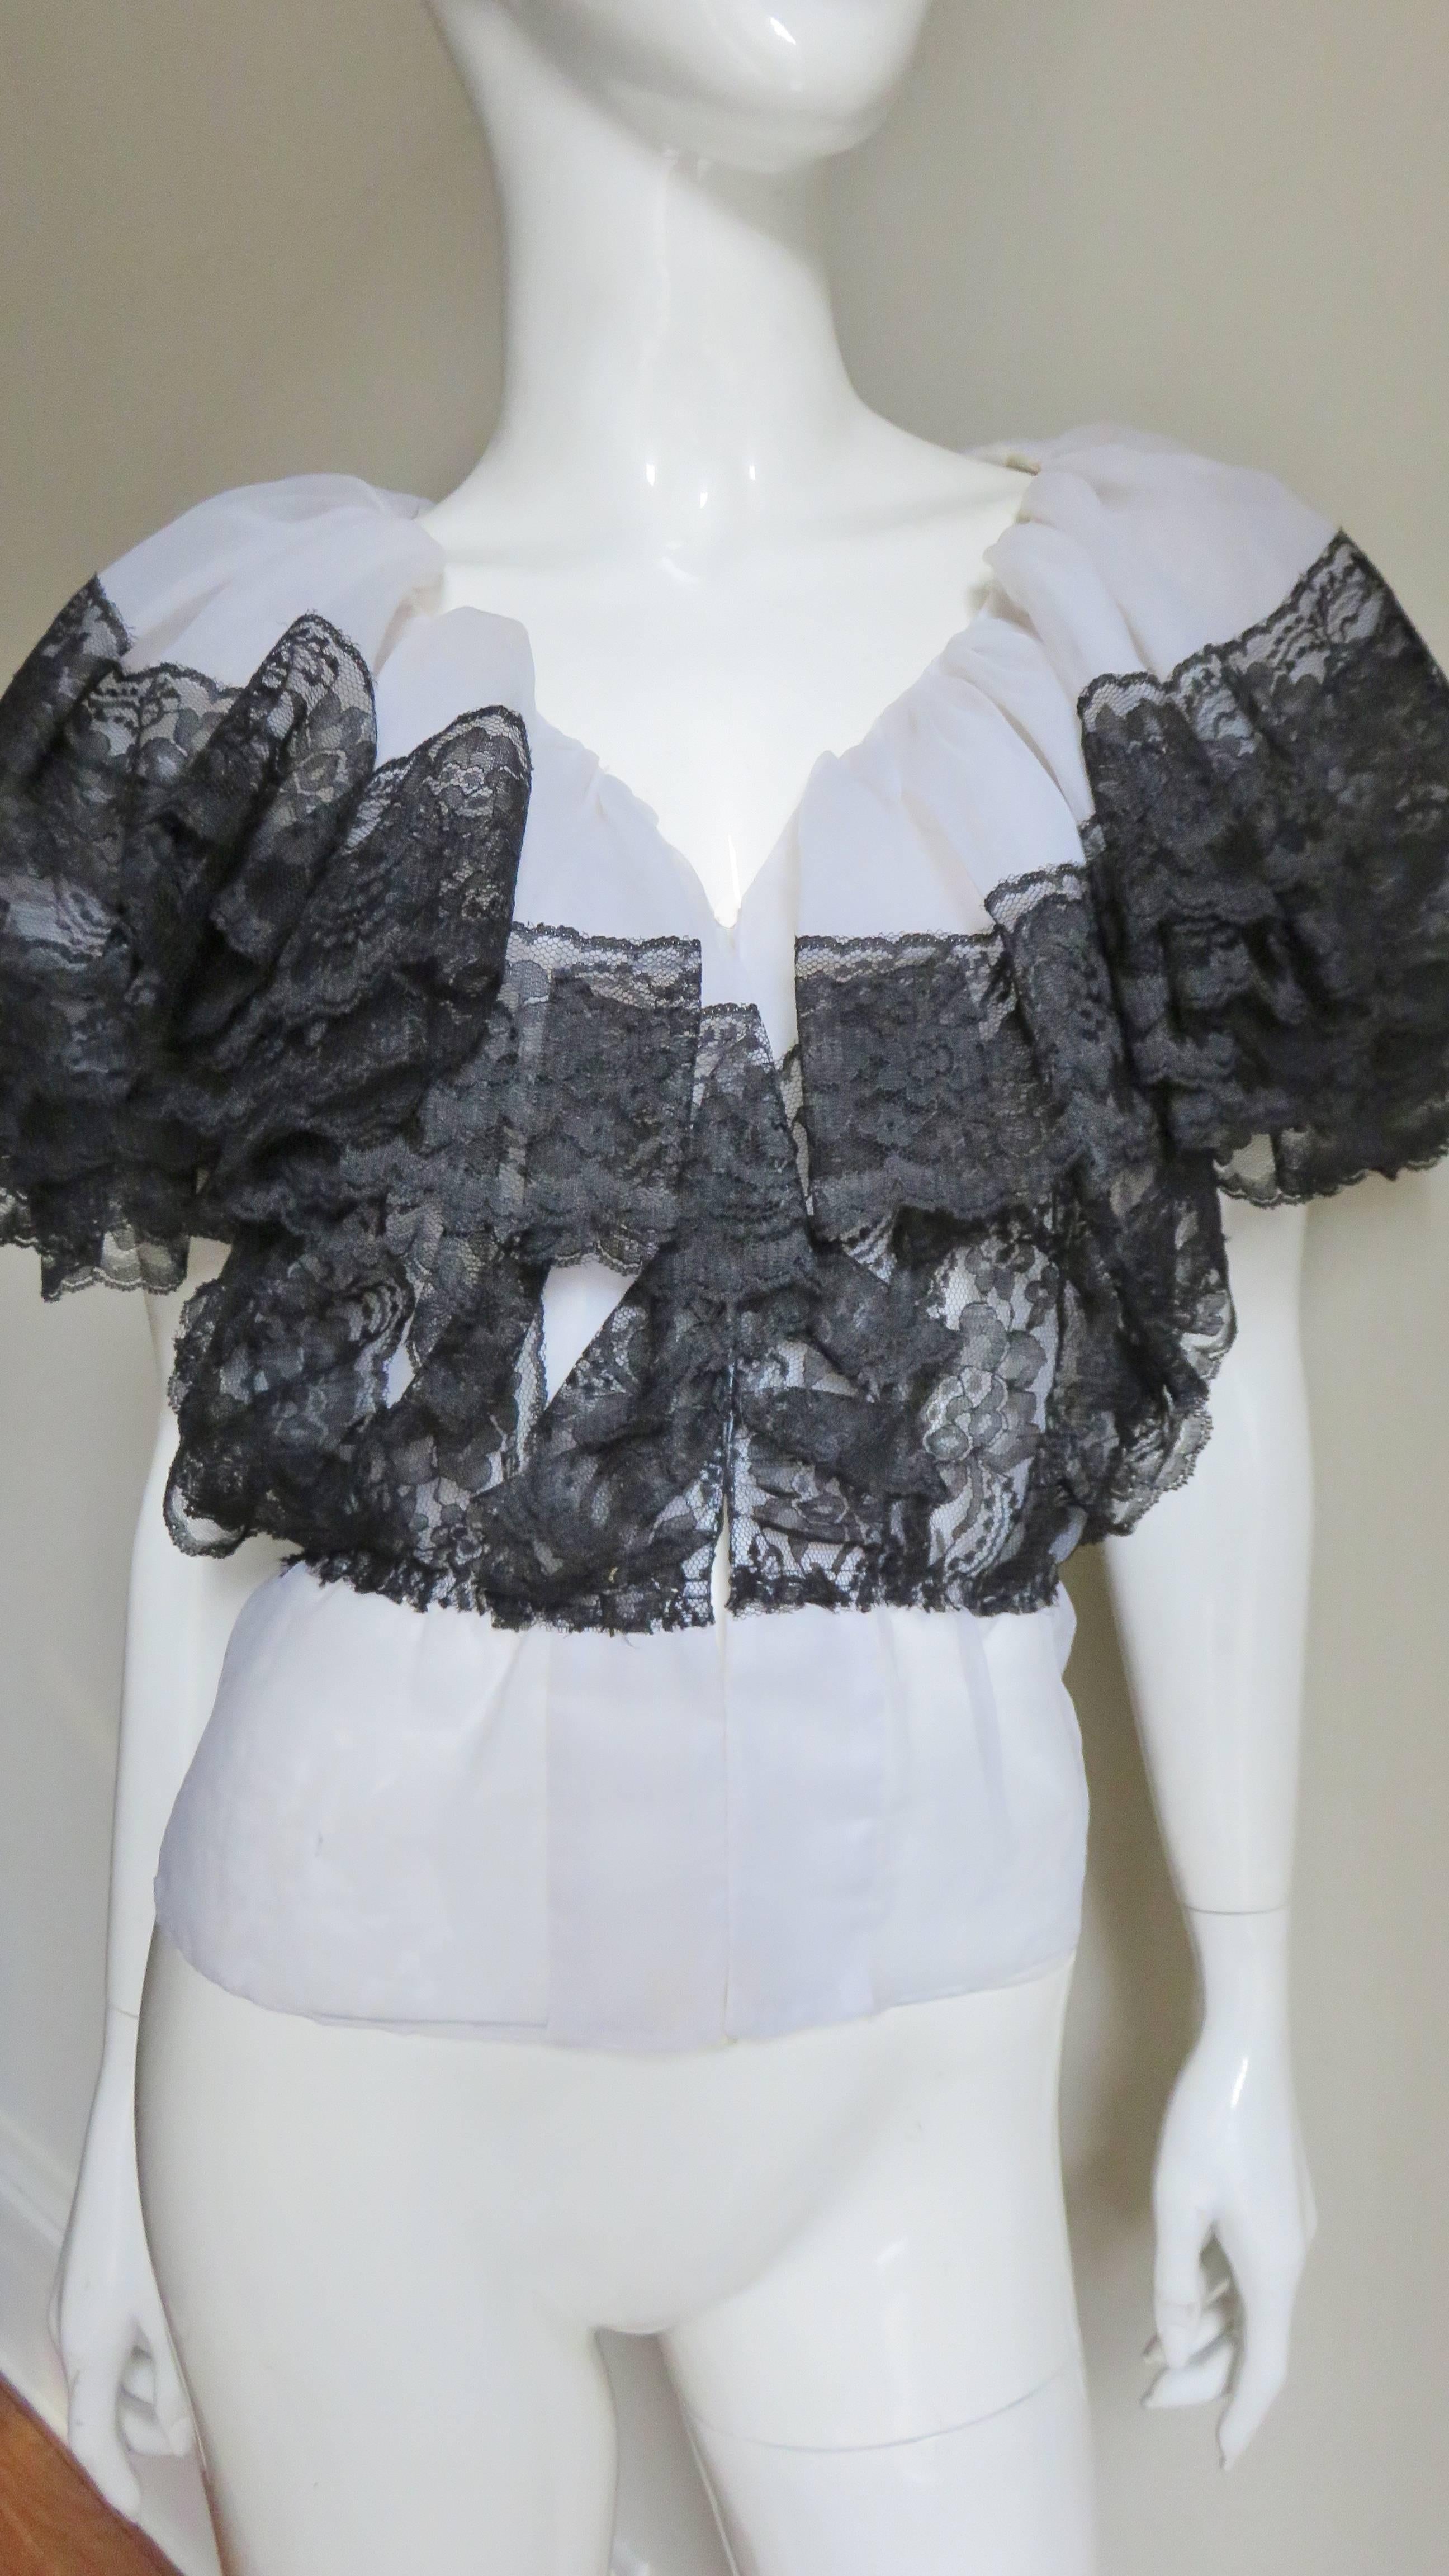 A gorgeous white organza and black top by Mignon.  It is V neck with a double layer gathered organza collar which lays over top cape sleeves all edged in 3" black lace with a scallop hem. The torso has vertical row of the black lace attached to